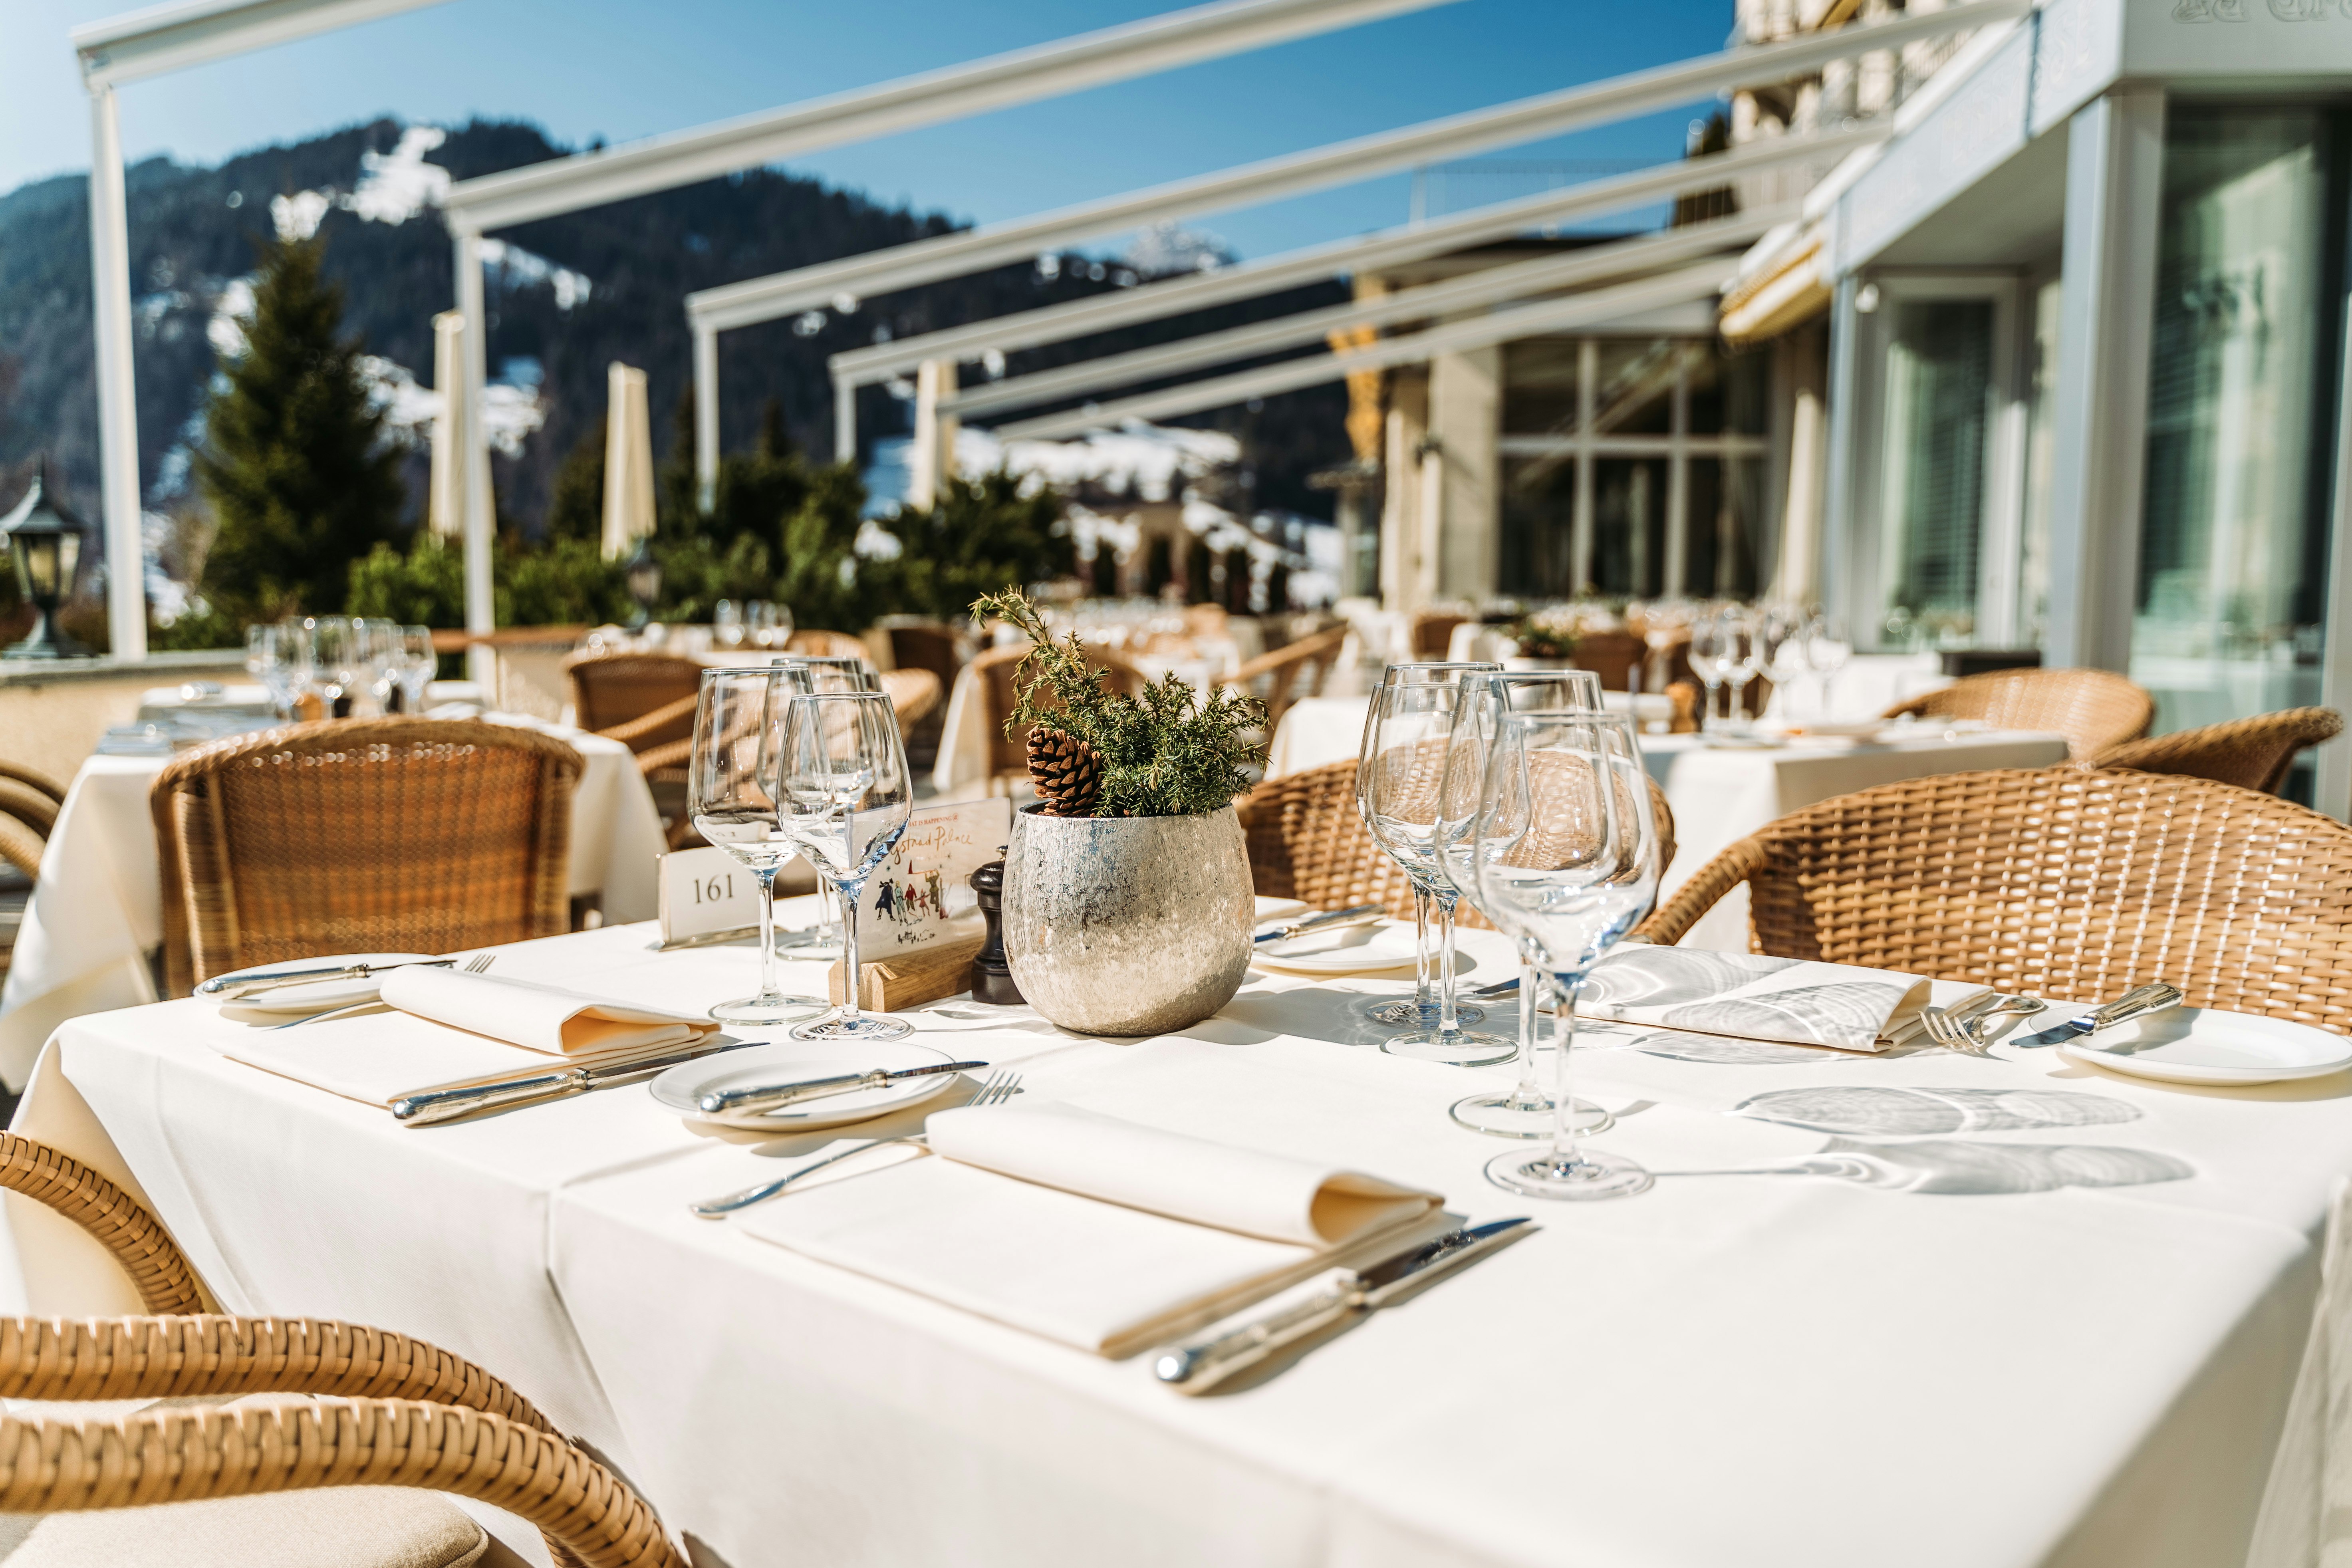 Four-course lunch in the Grand Restaurant or Grande Terrasse